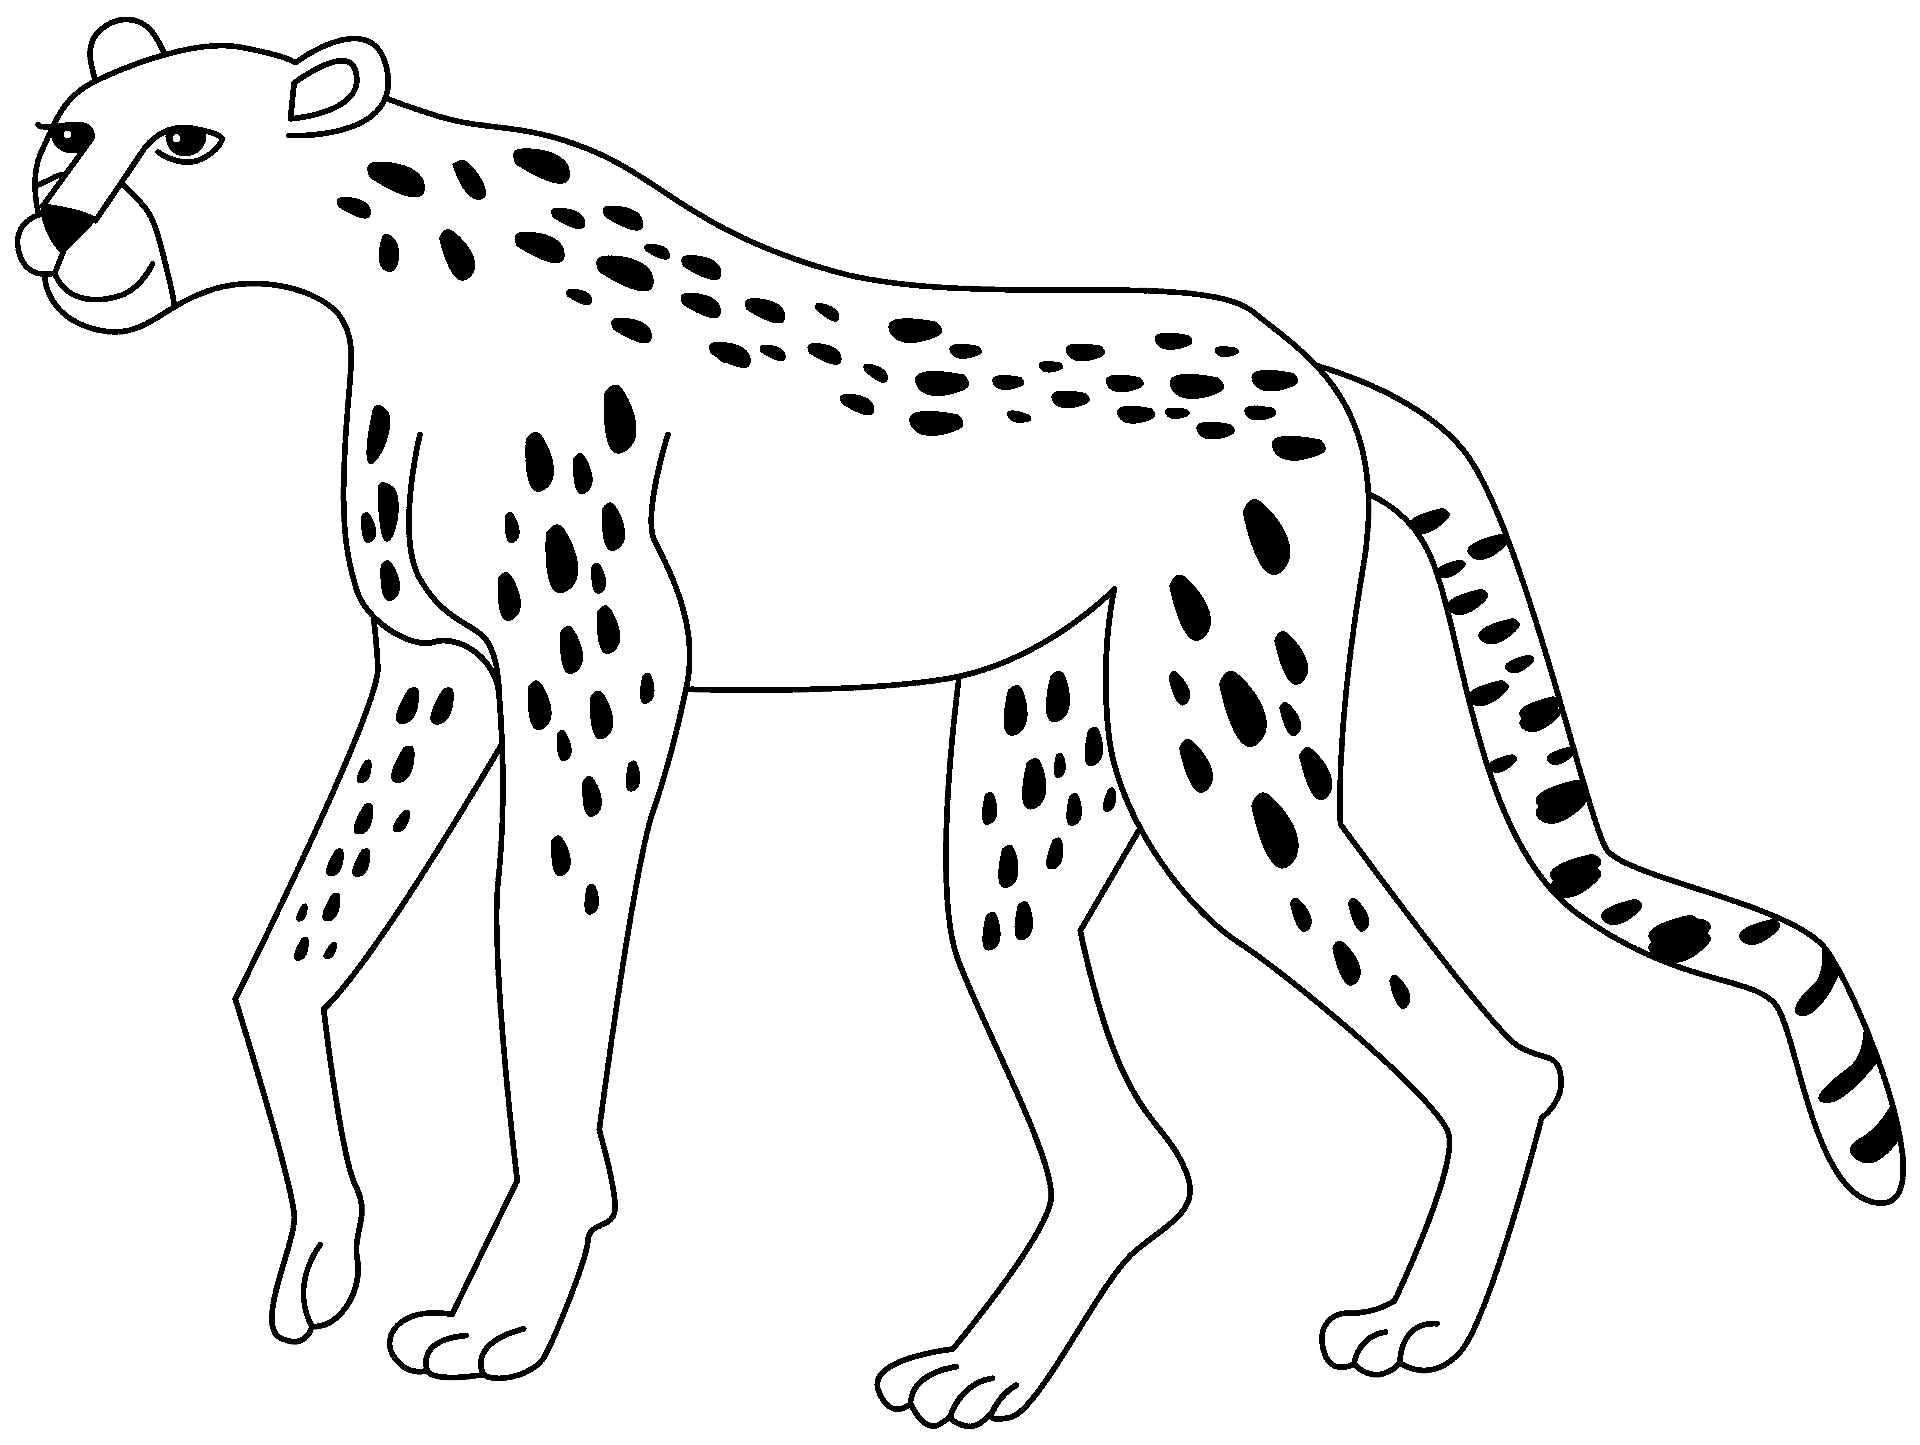 Coloring page of a cheetah